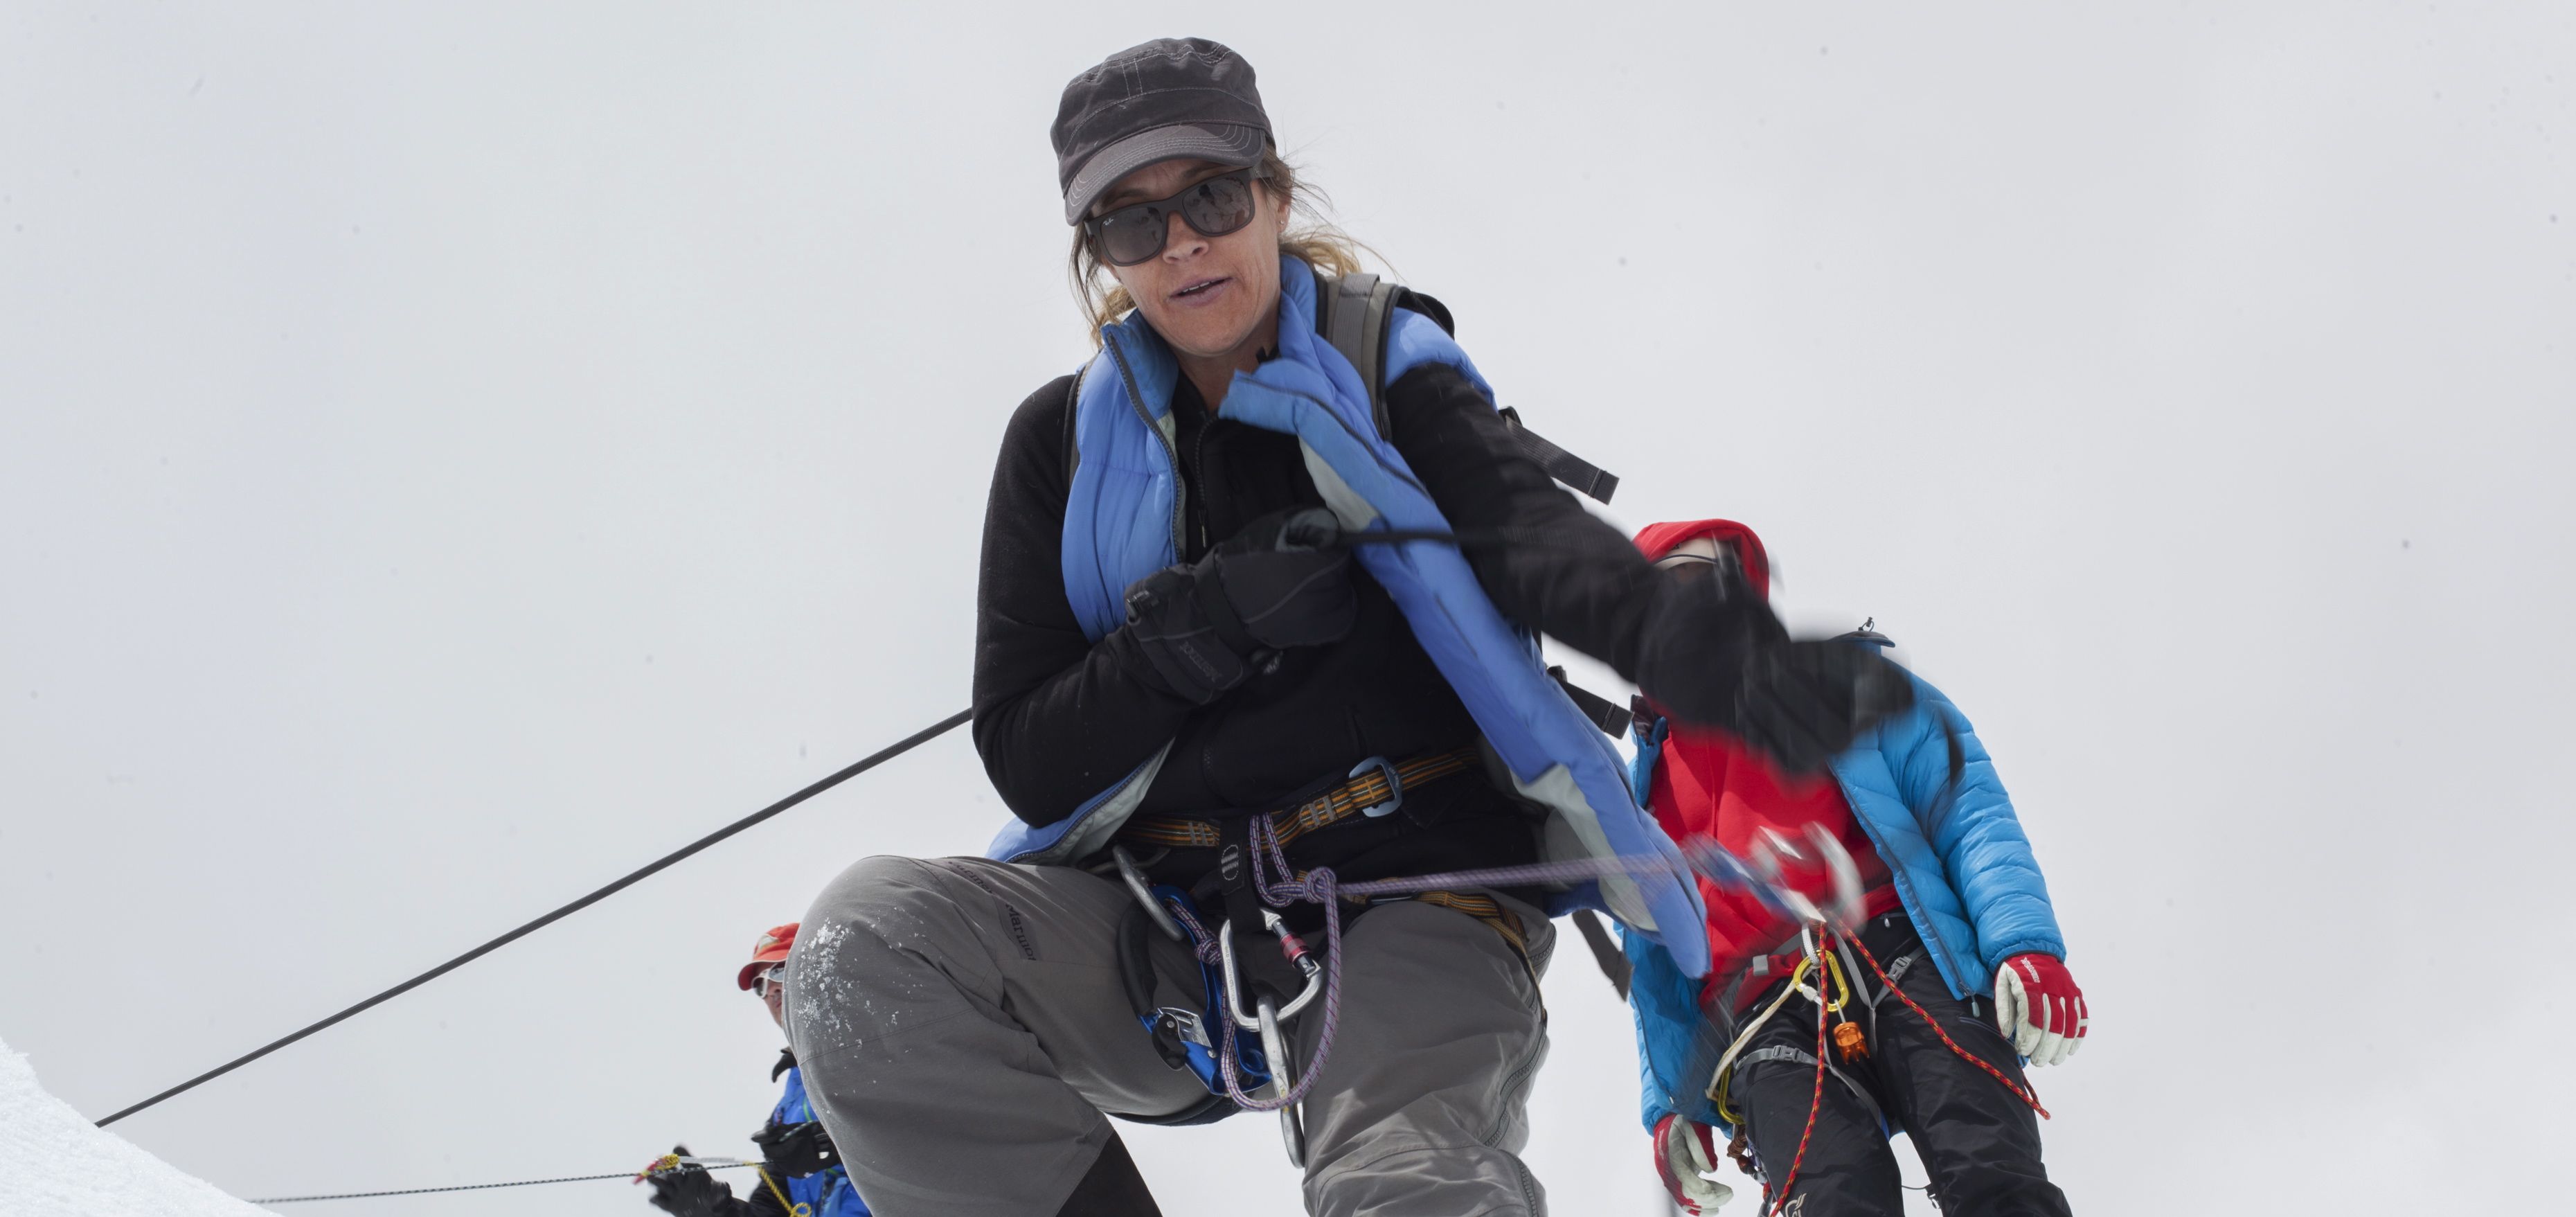 Sherpa – An Interview with Director Jennifer Peedom